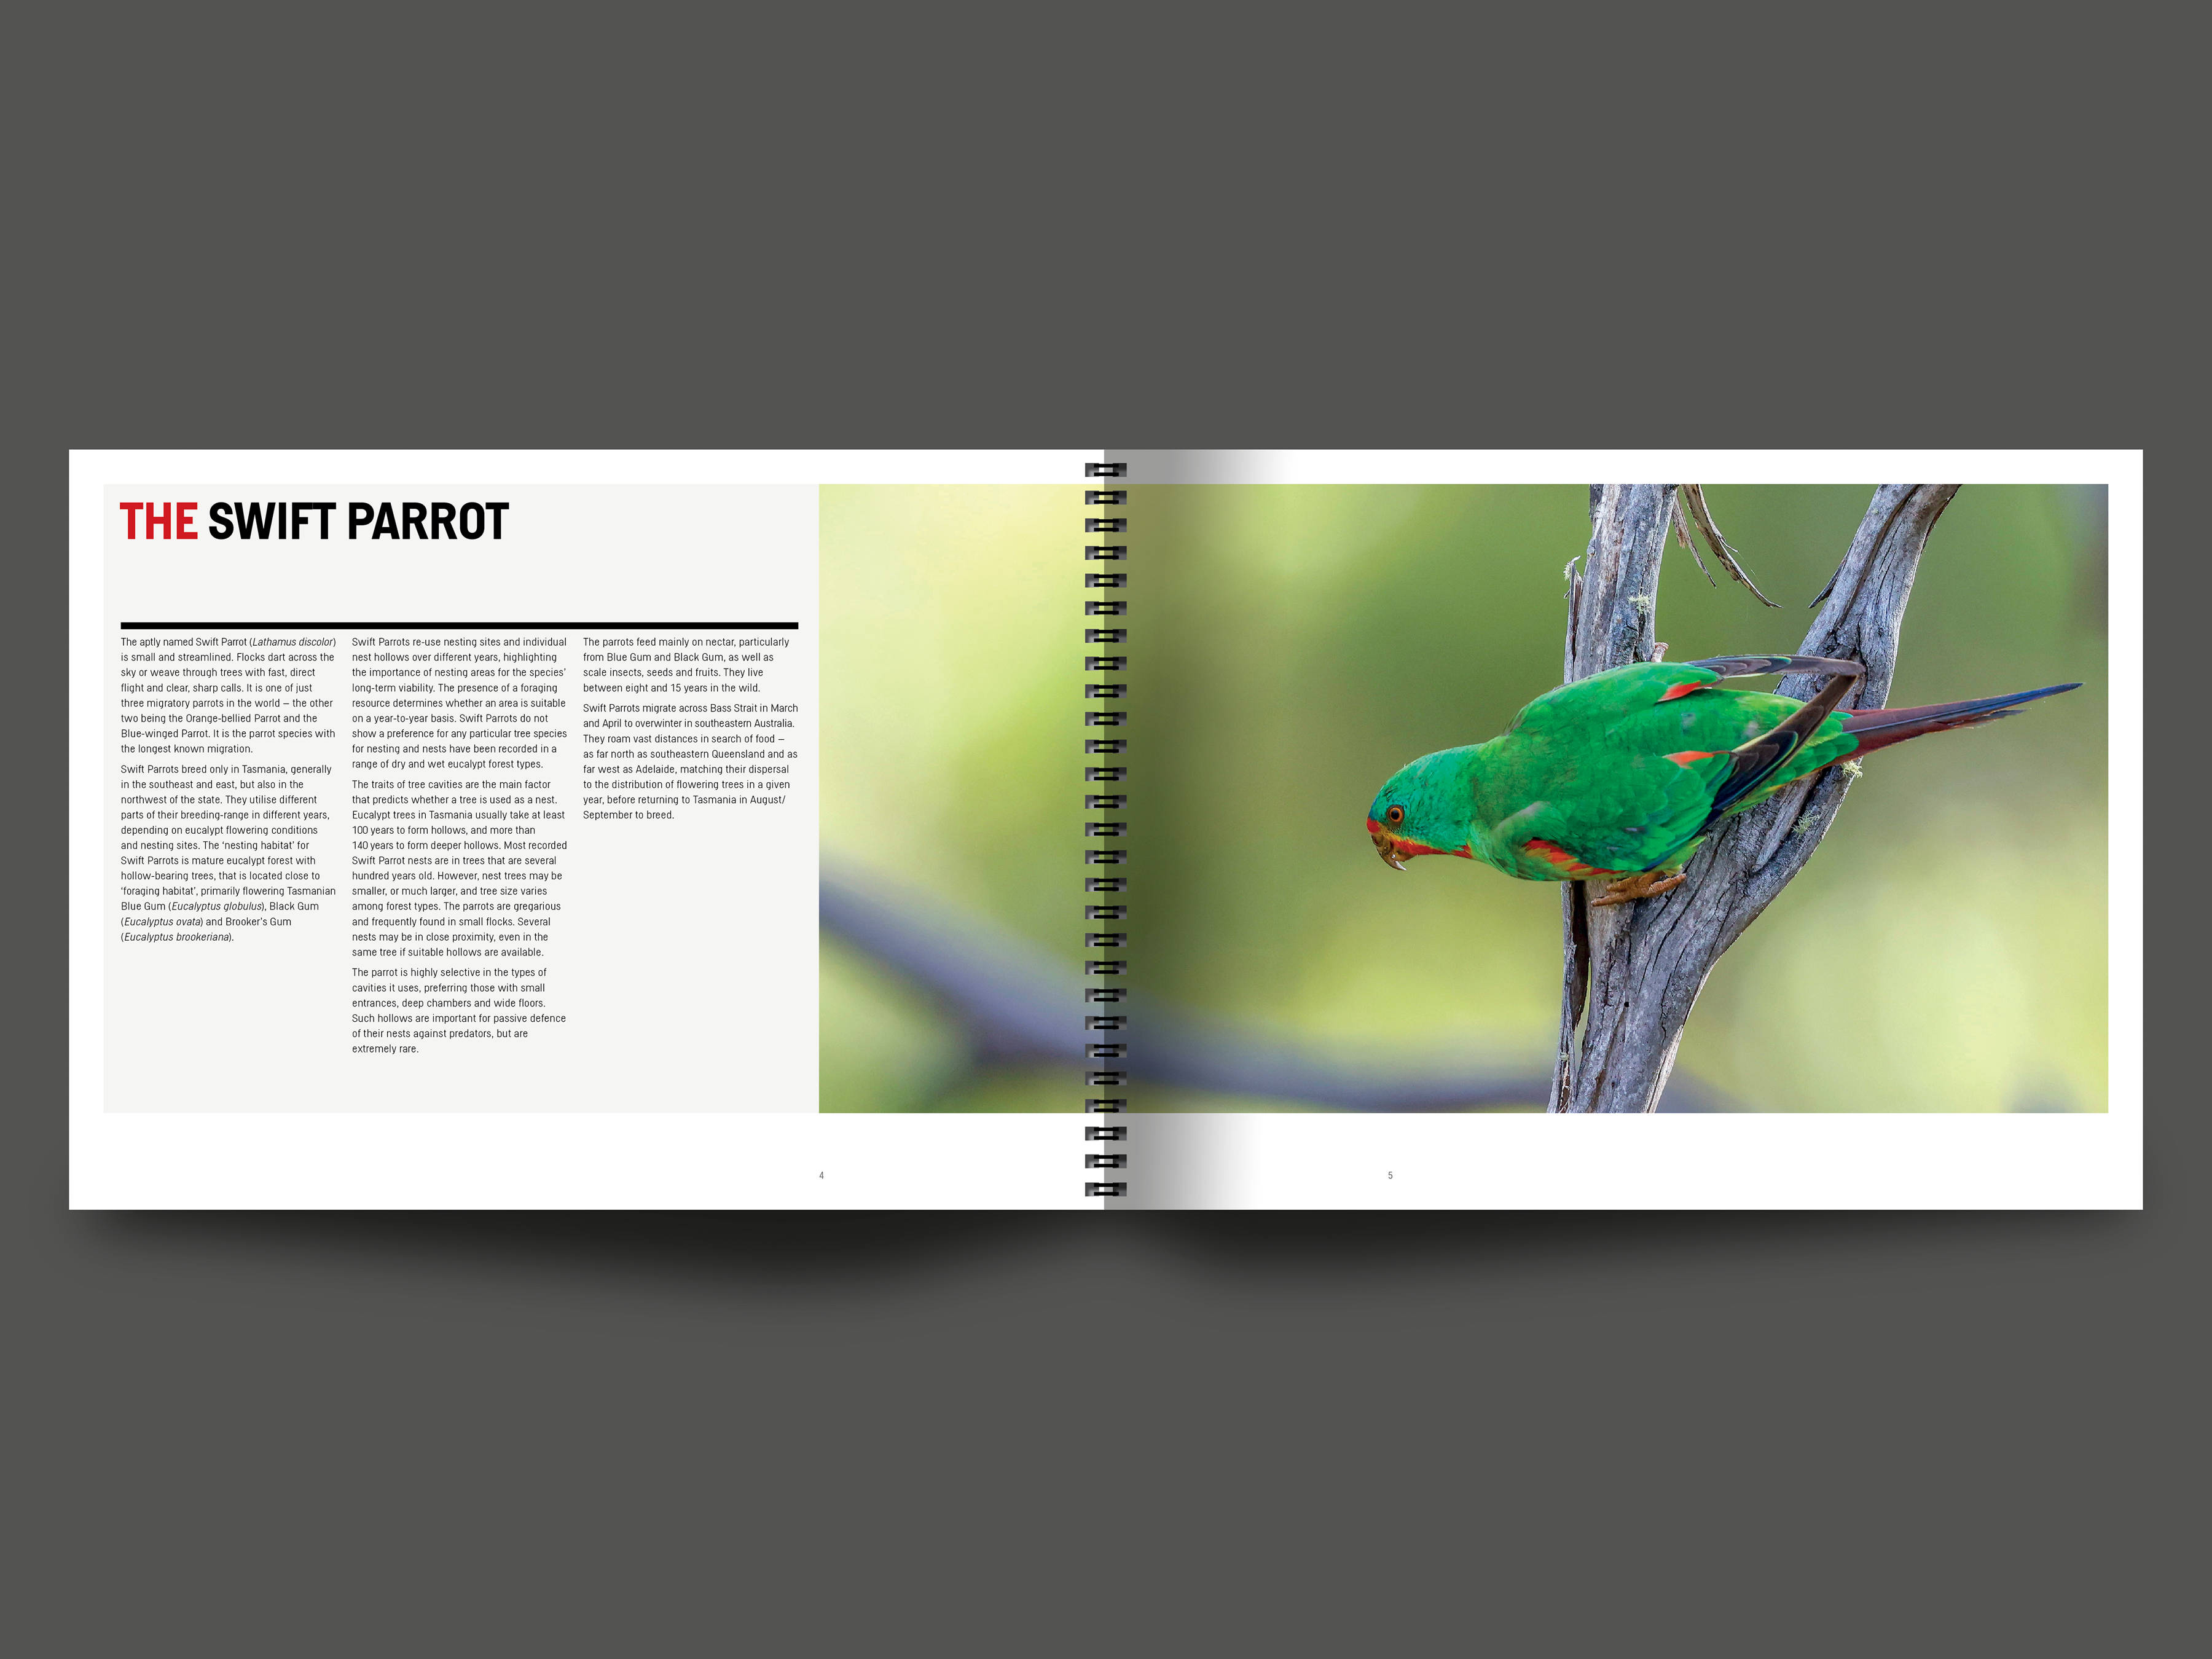 A double page spread from the book featuring text about the Swift Parrot on the left and an image of a Swift Parrot perched on a branch on the right. Image by Rob Blakers.